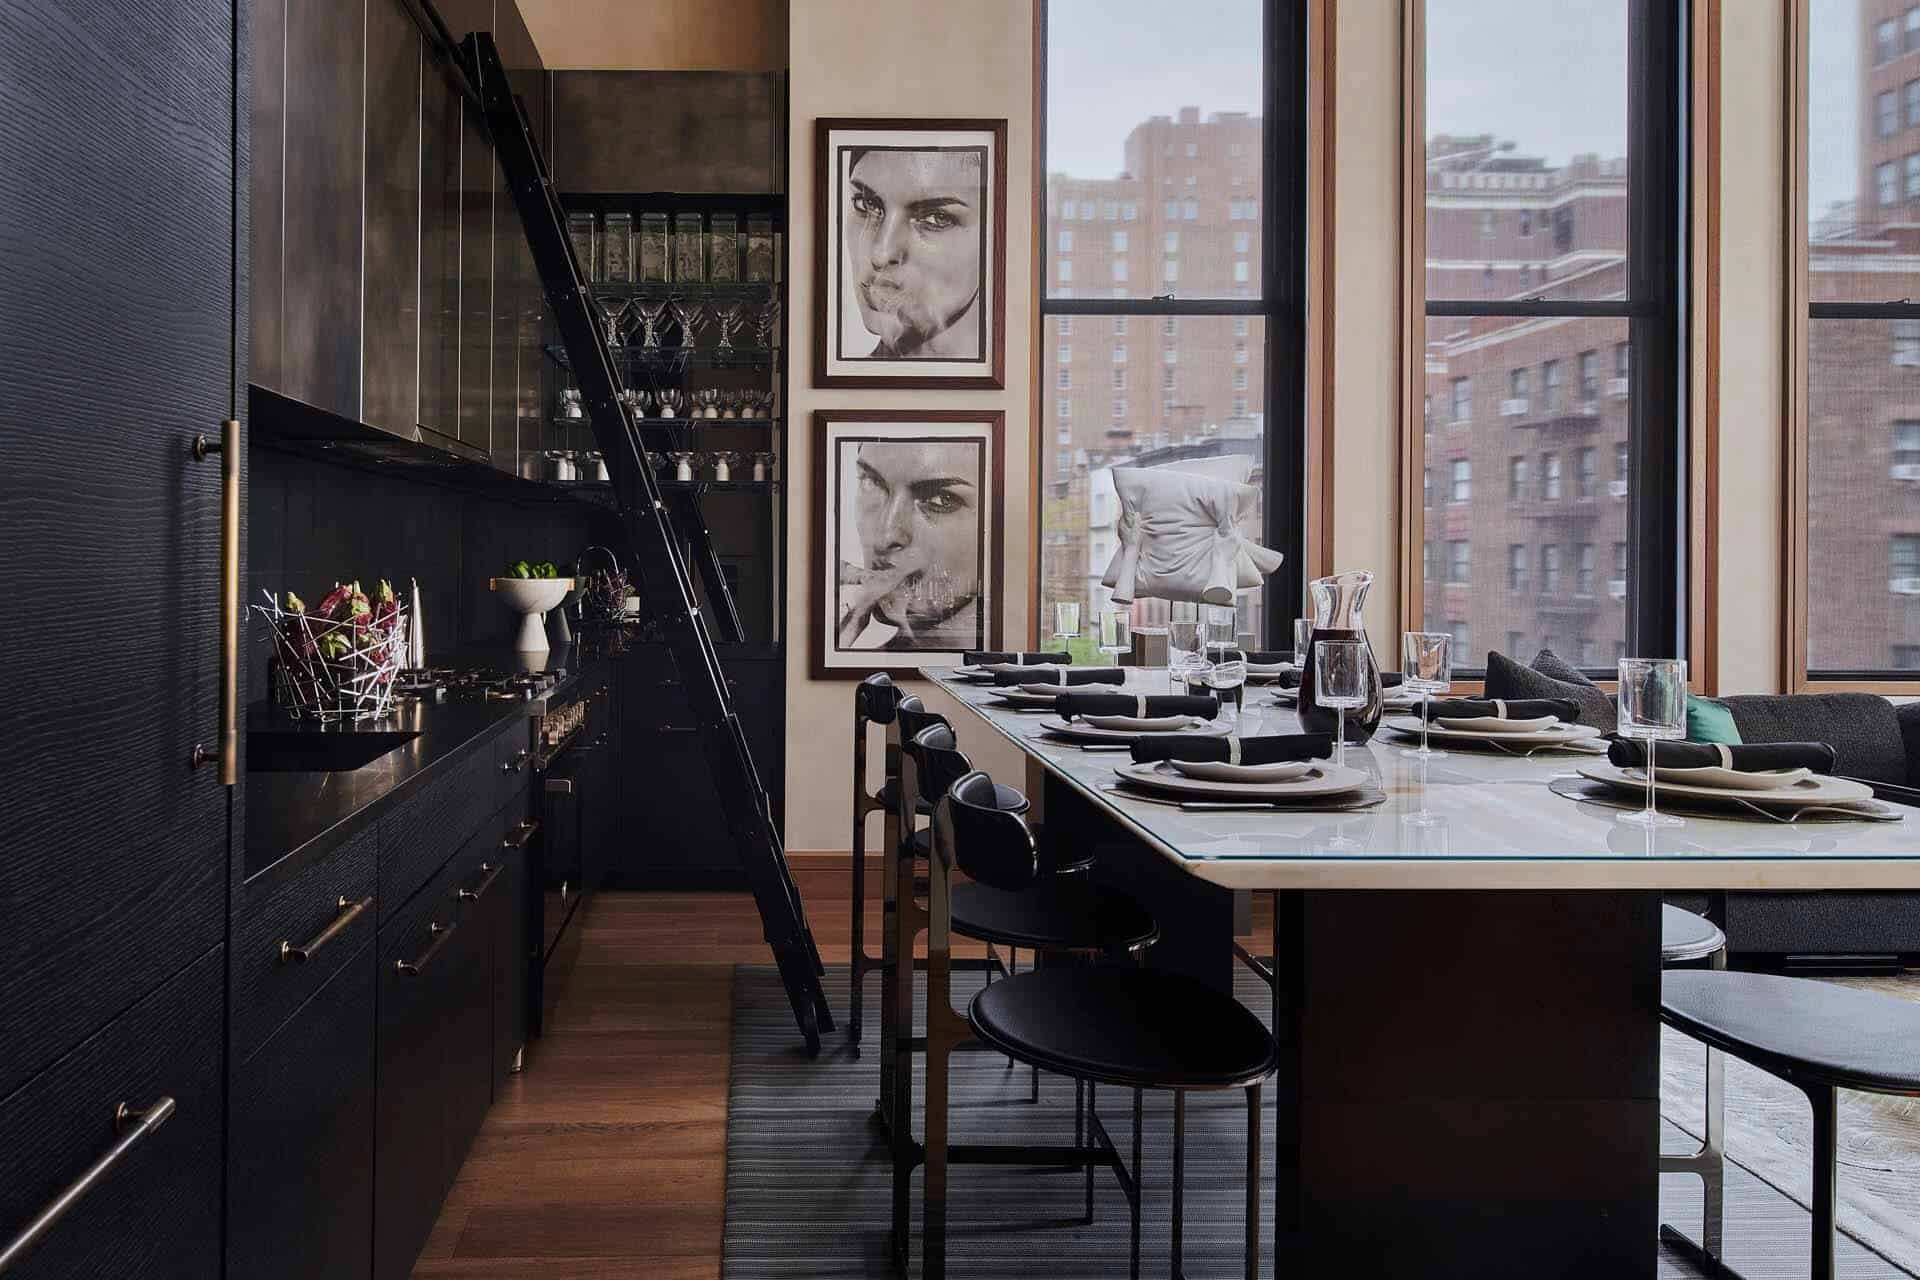 NYC contemporary kitchen contrasts dark finishes and textures with the light flooding in from oversized windows.